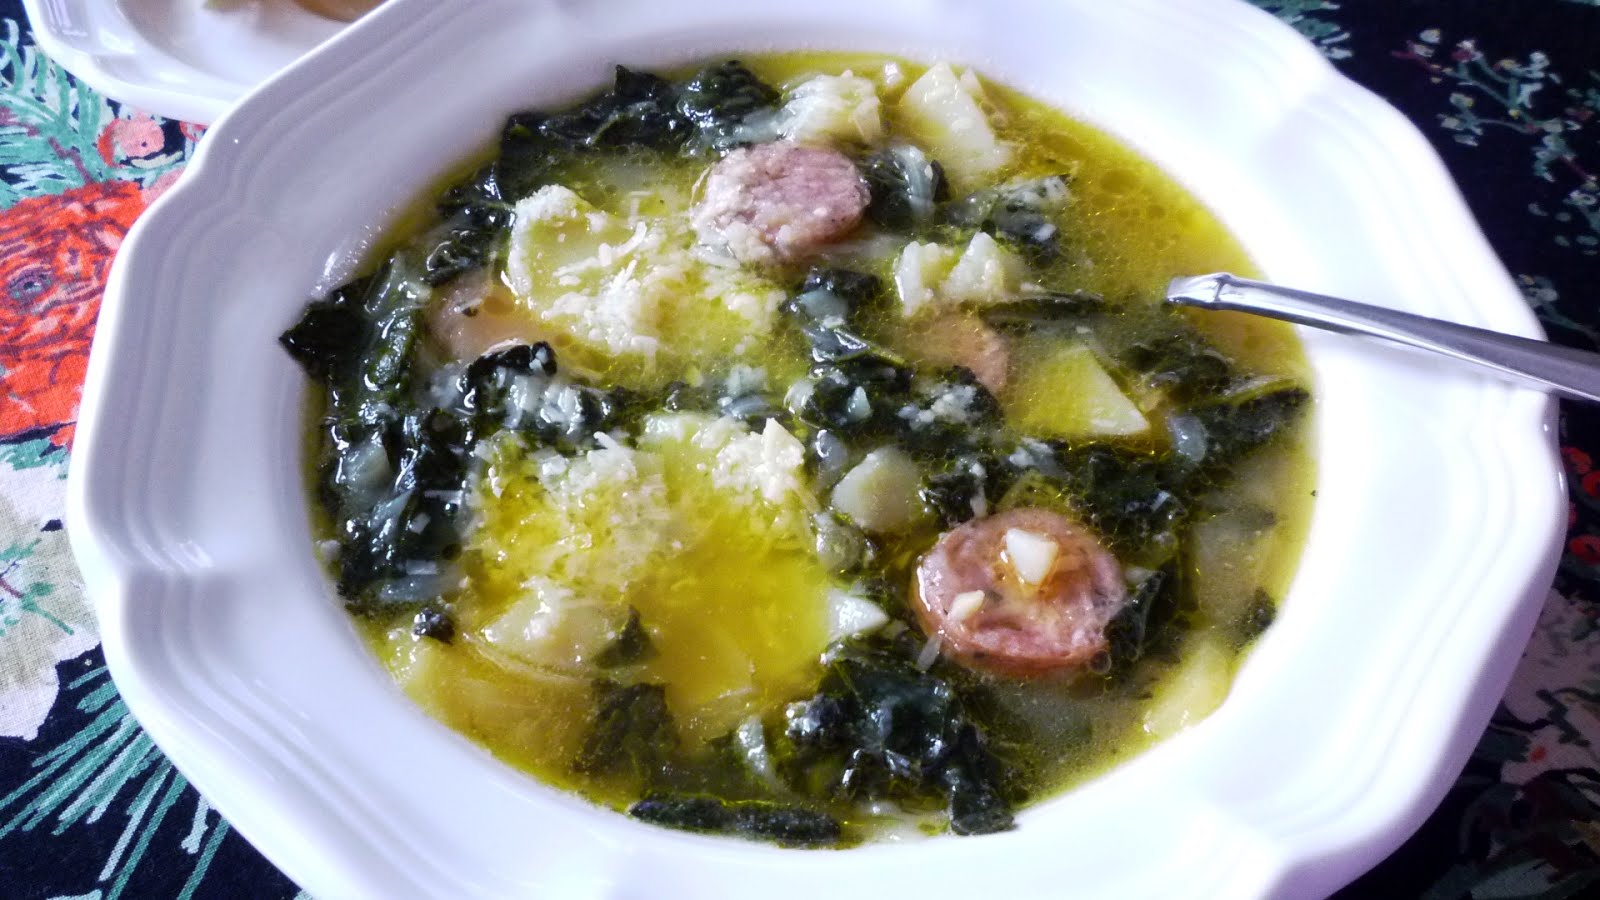 For Love of the Table: Kale & Potato Soup with Garlic Sausage